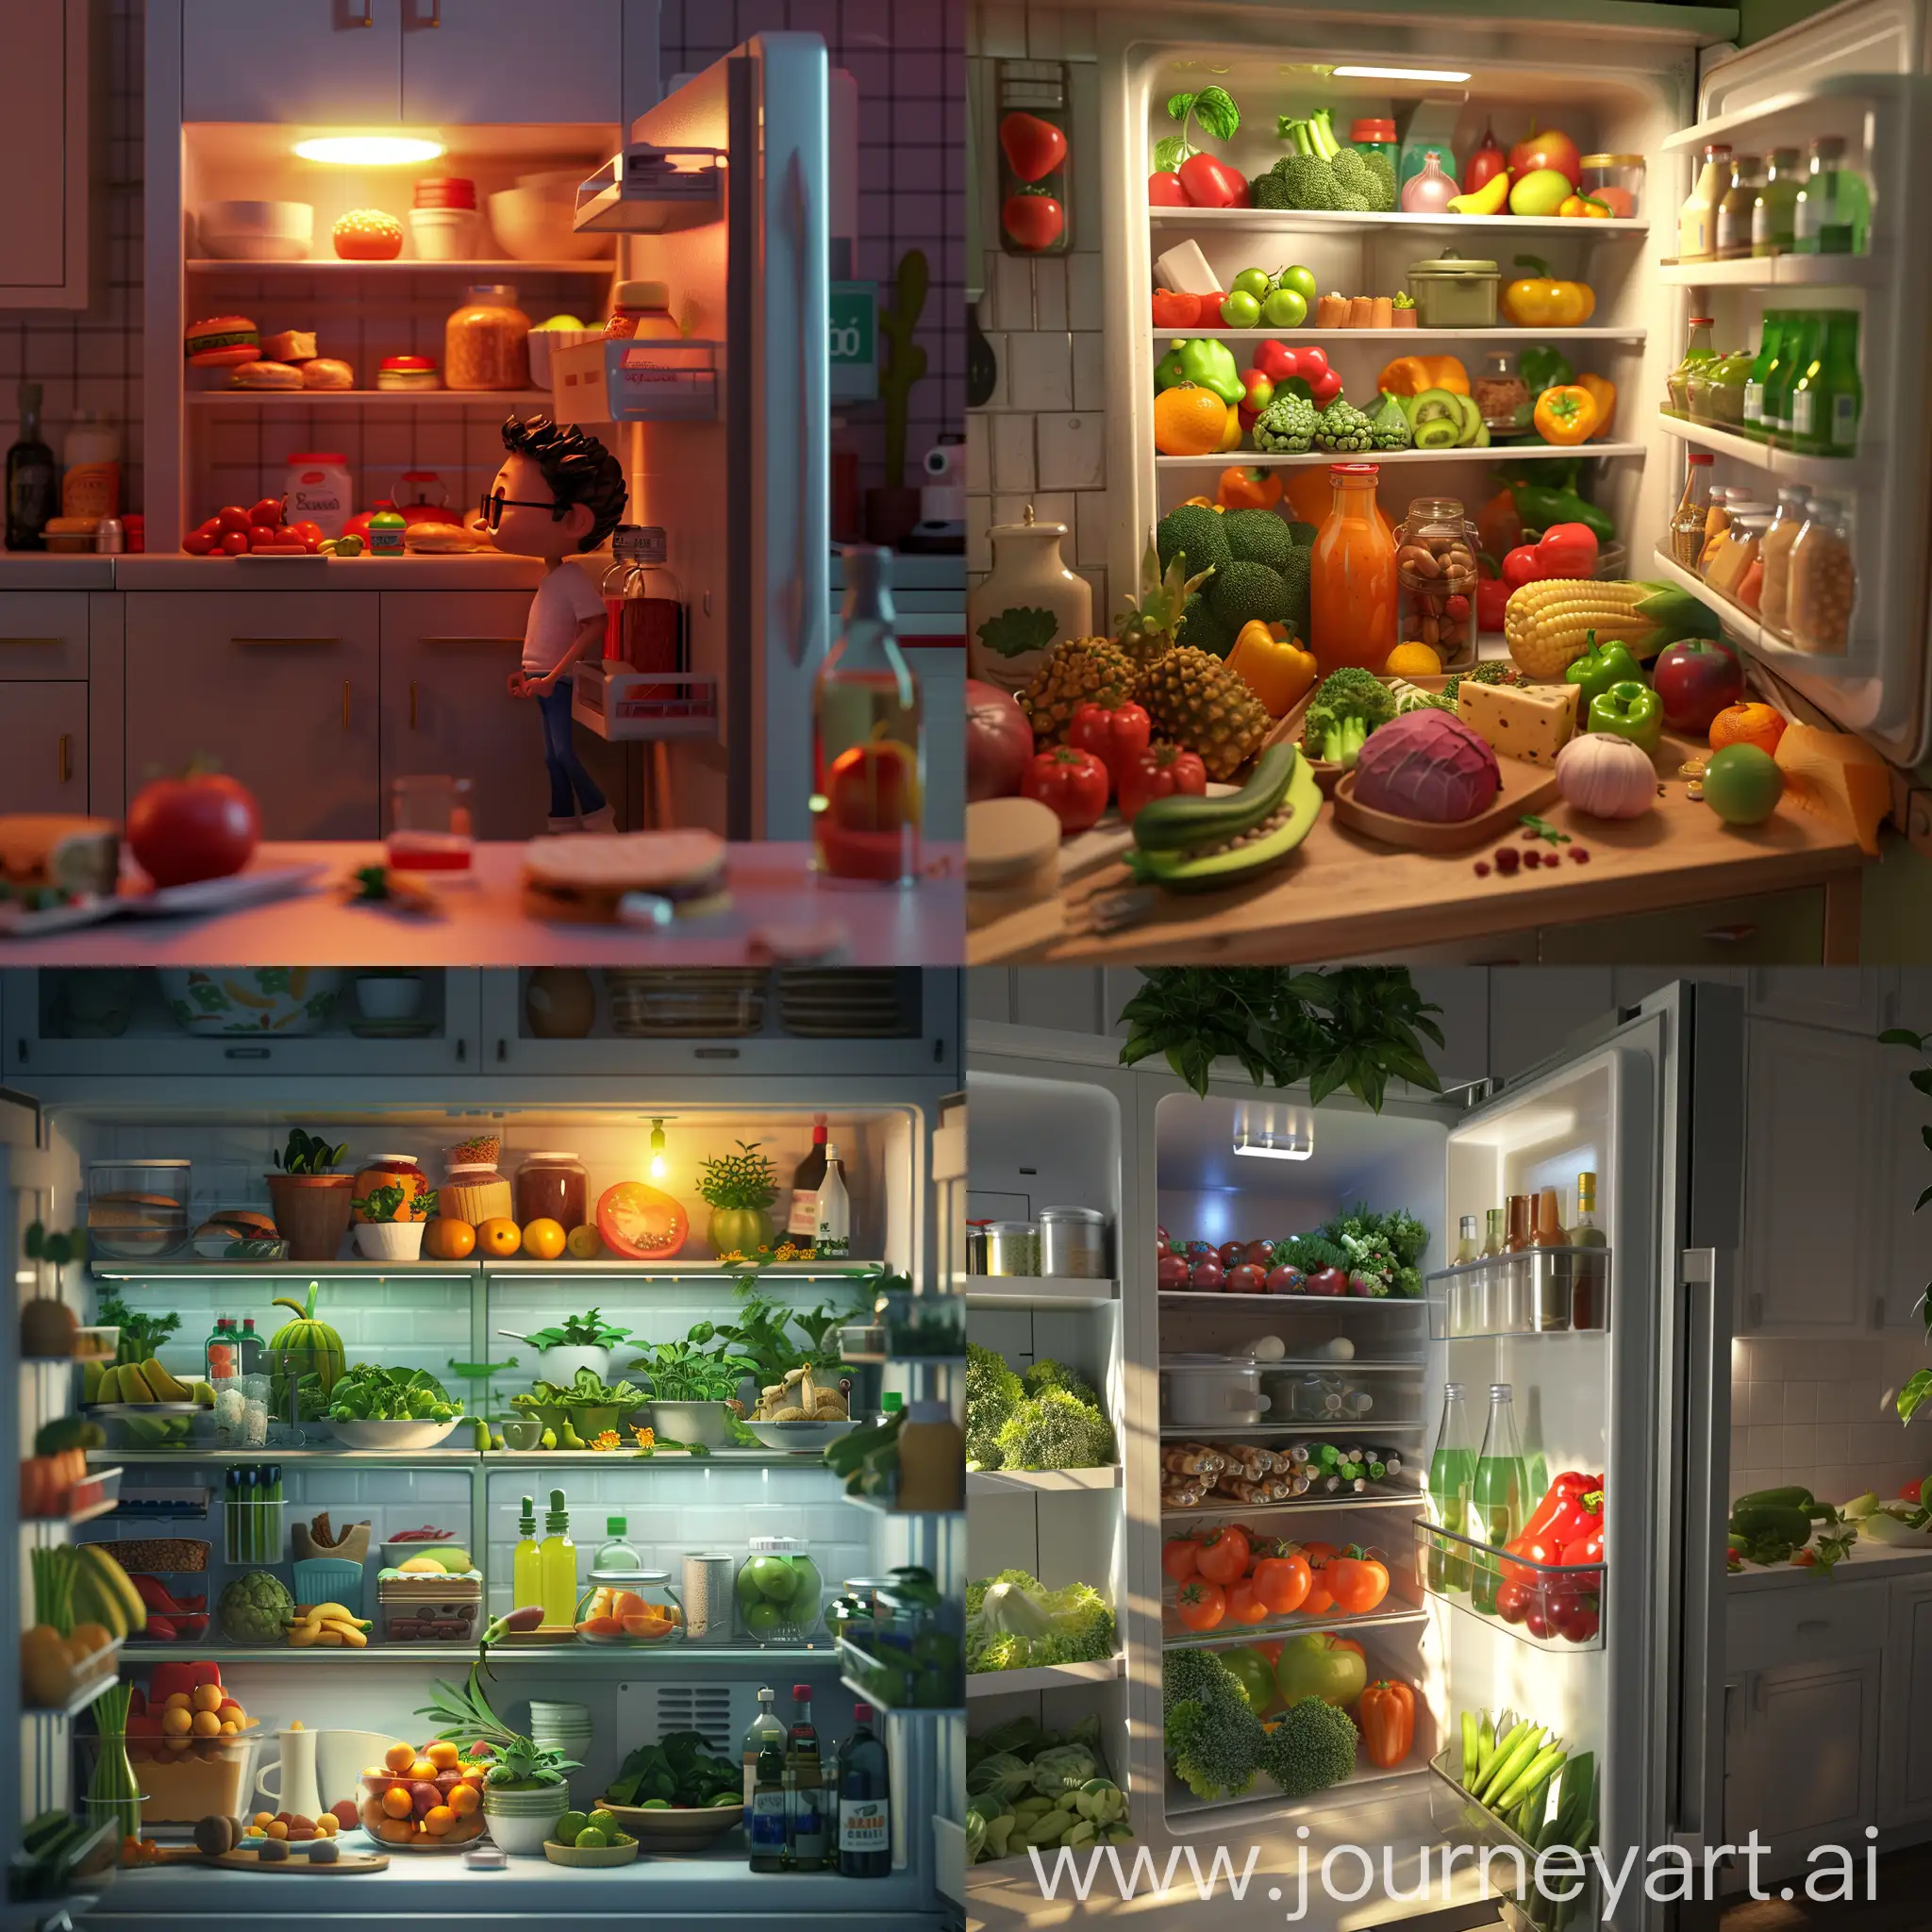 There's a lot of food in the fridge :: 3d animation 